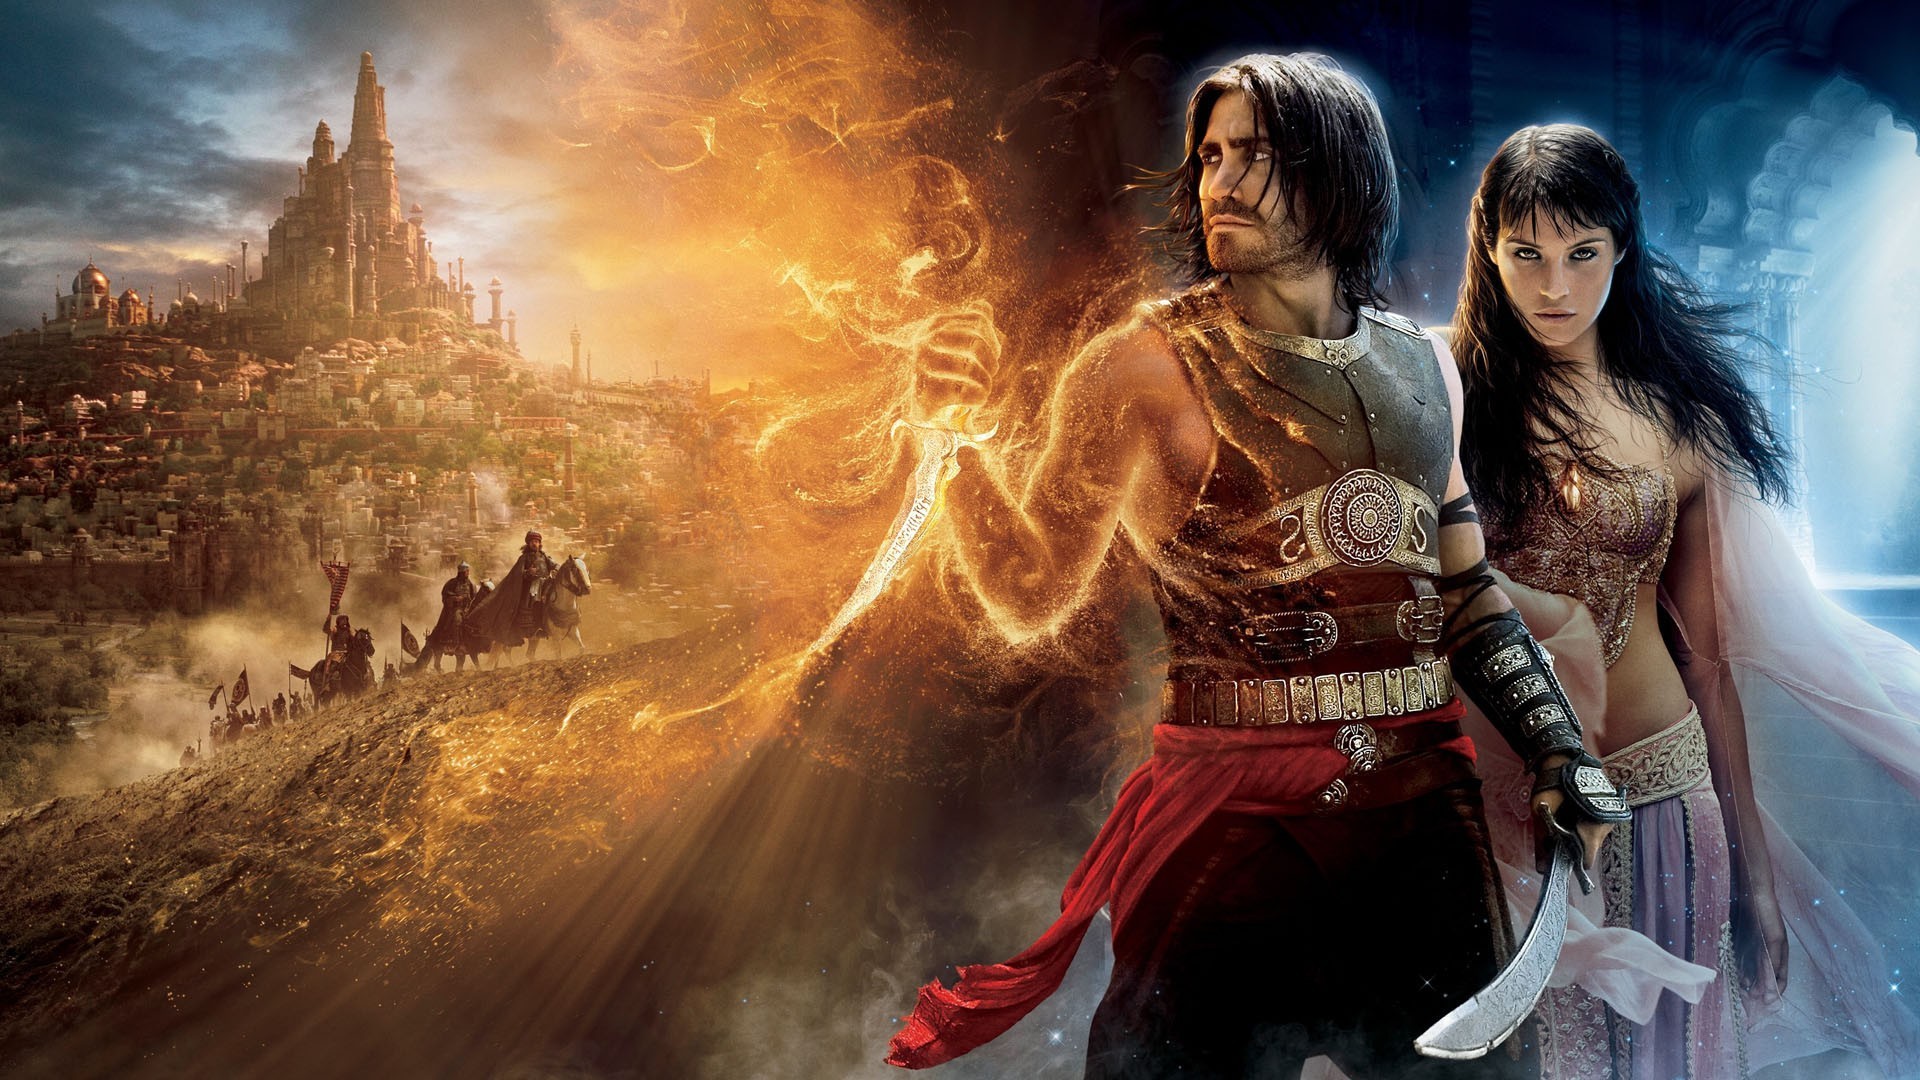 Prince Of Persia The Sands Of Time Movies Jake Gyllenhaal Gemma Arterton 1920x1080